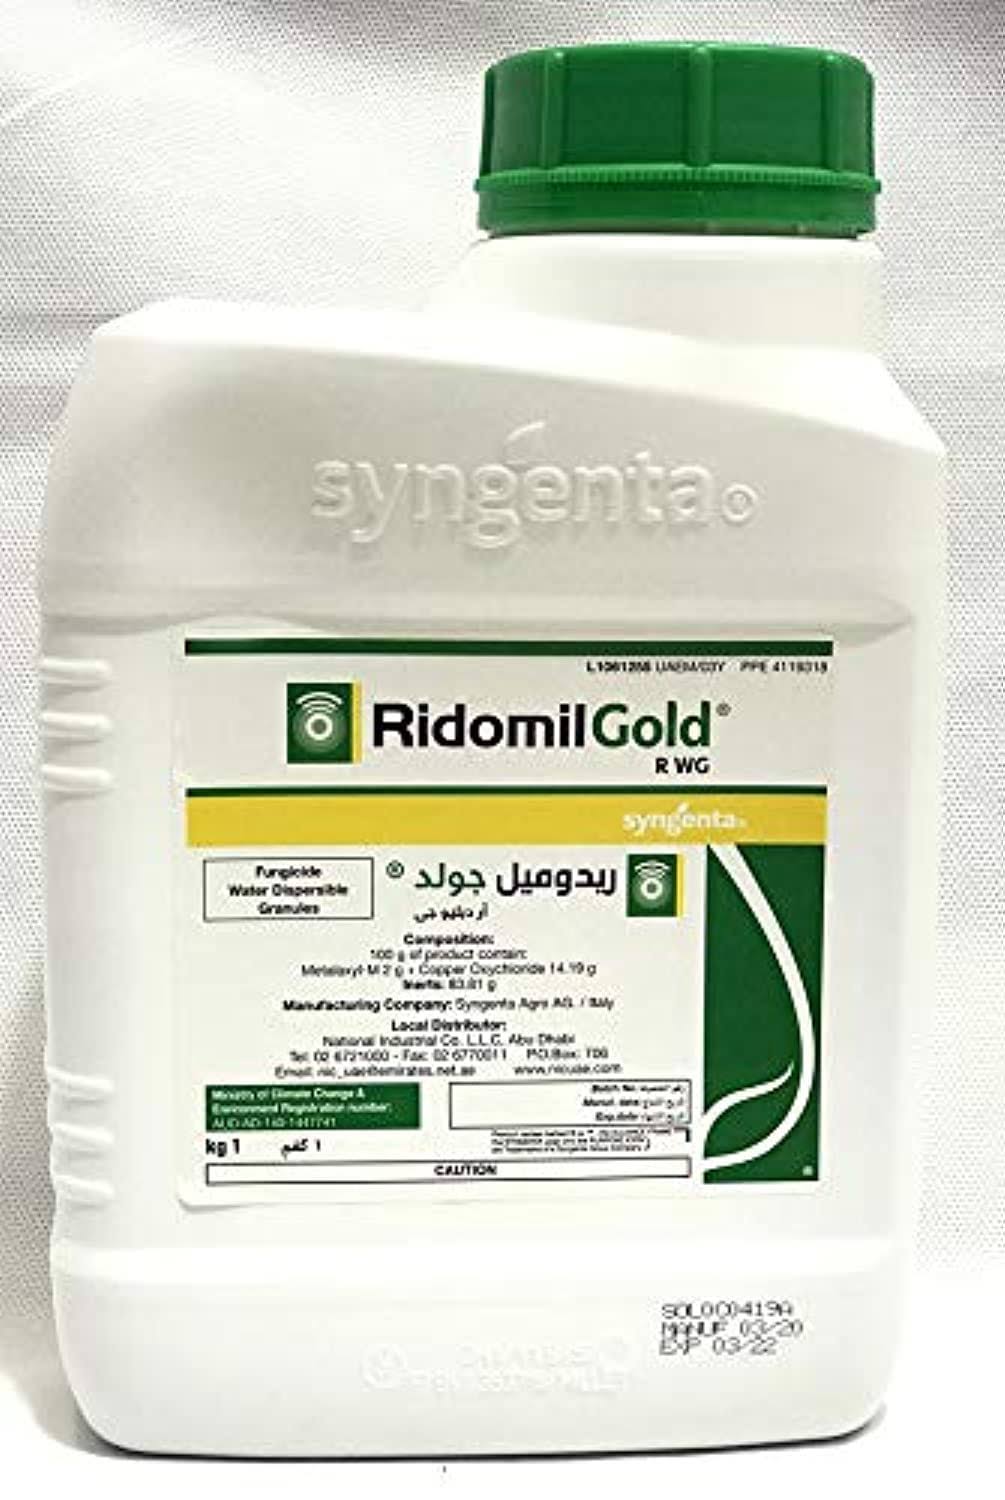 Ridomil Gold® "Fungicide & Bactericide" 1kg